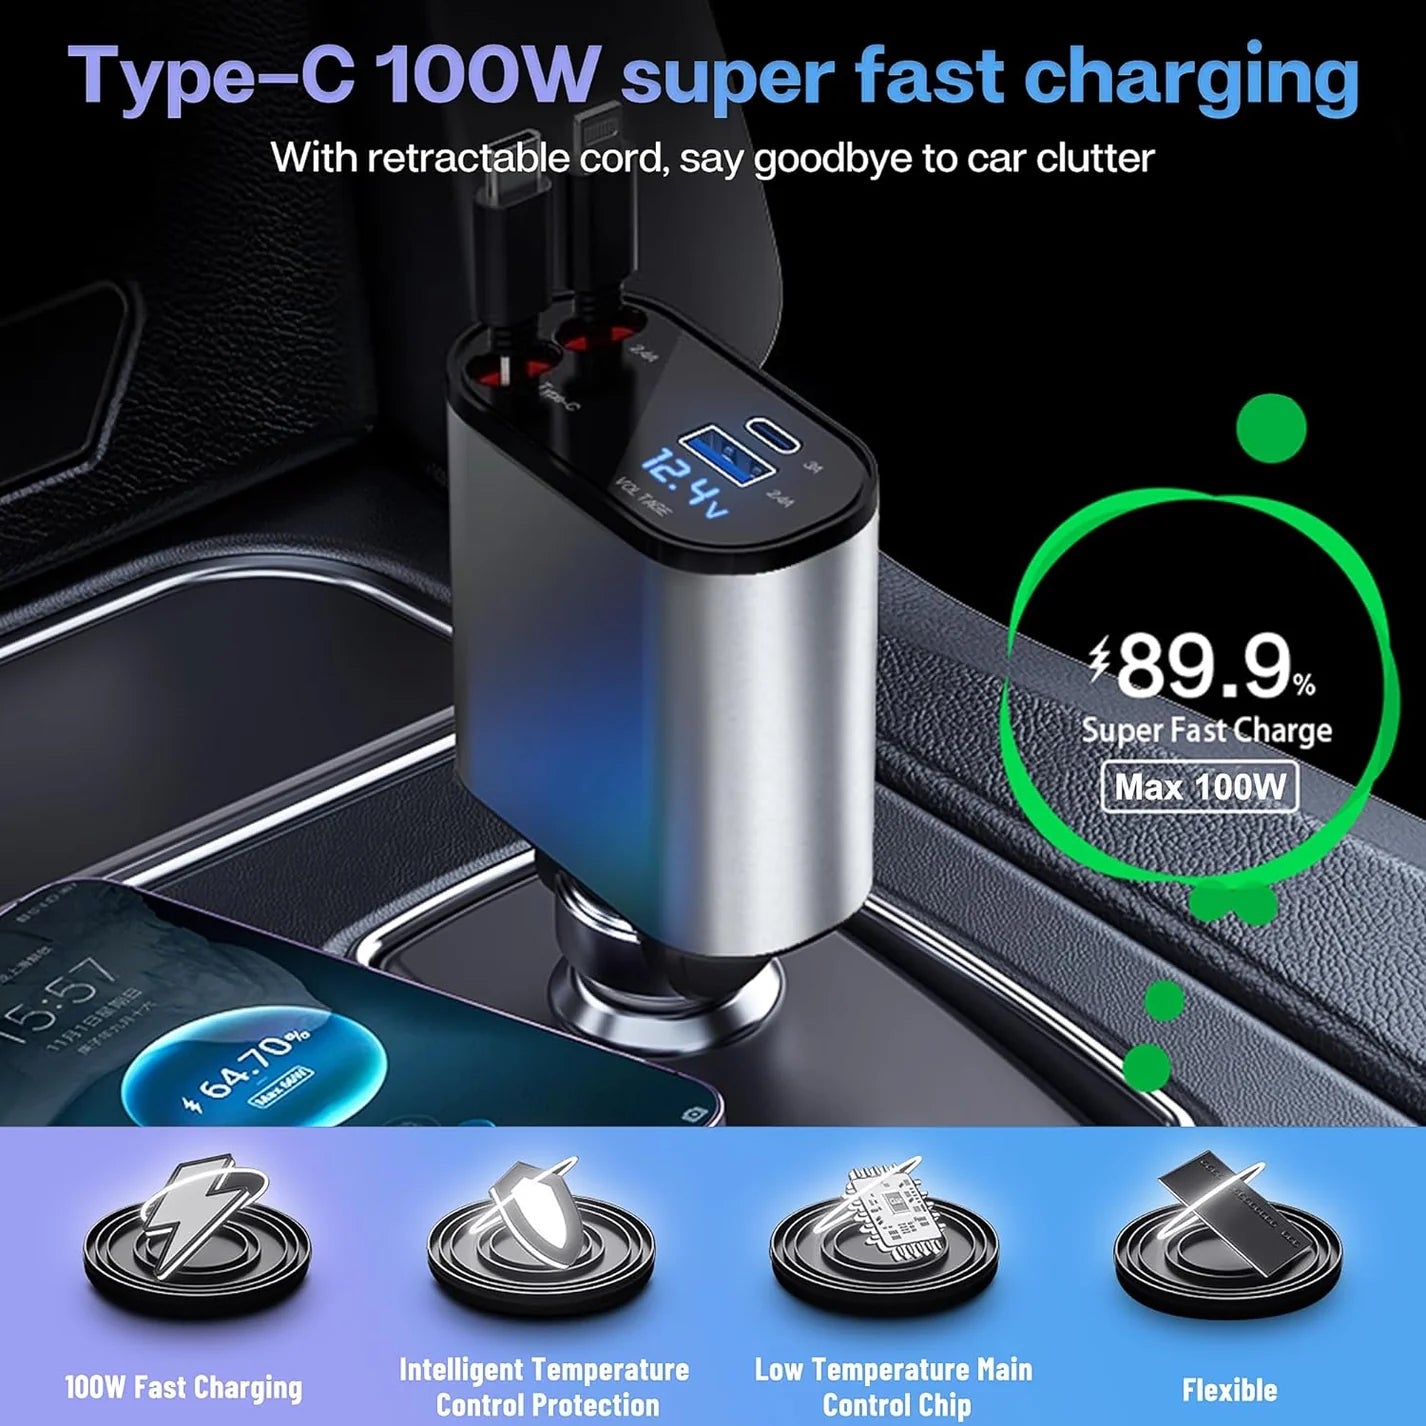 RhinoGuardAccessories Retractable Car Charger 120W 4 in 1 Superfast